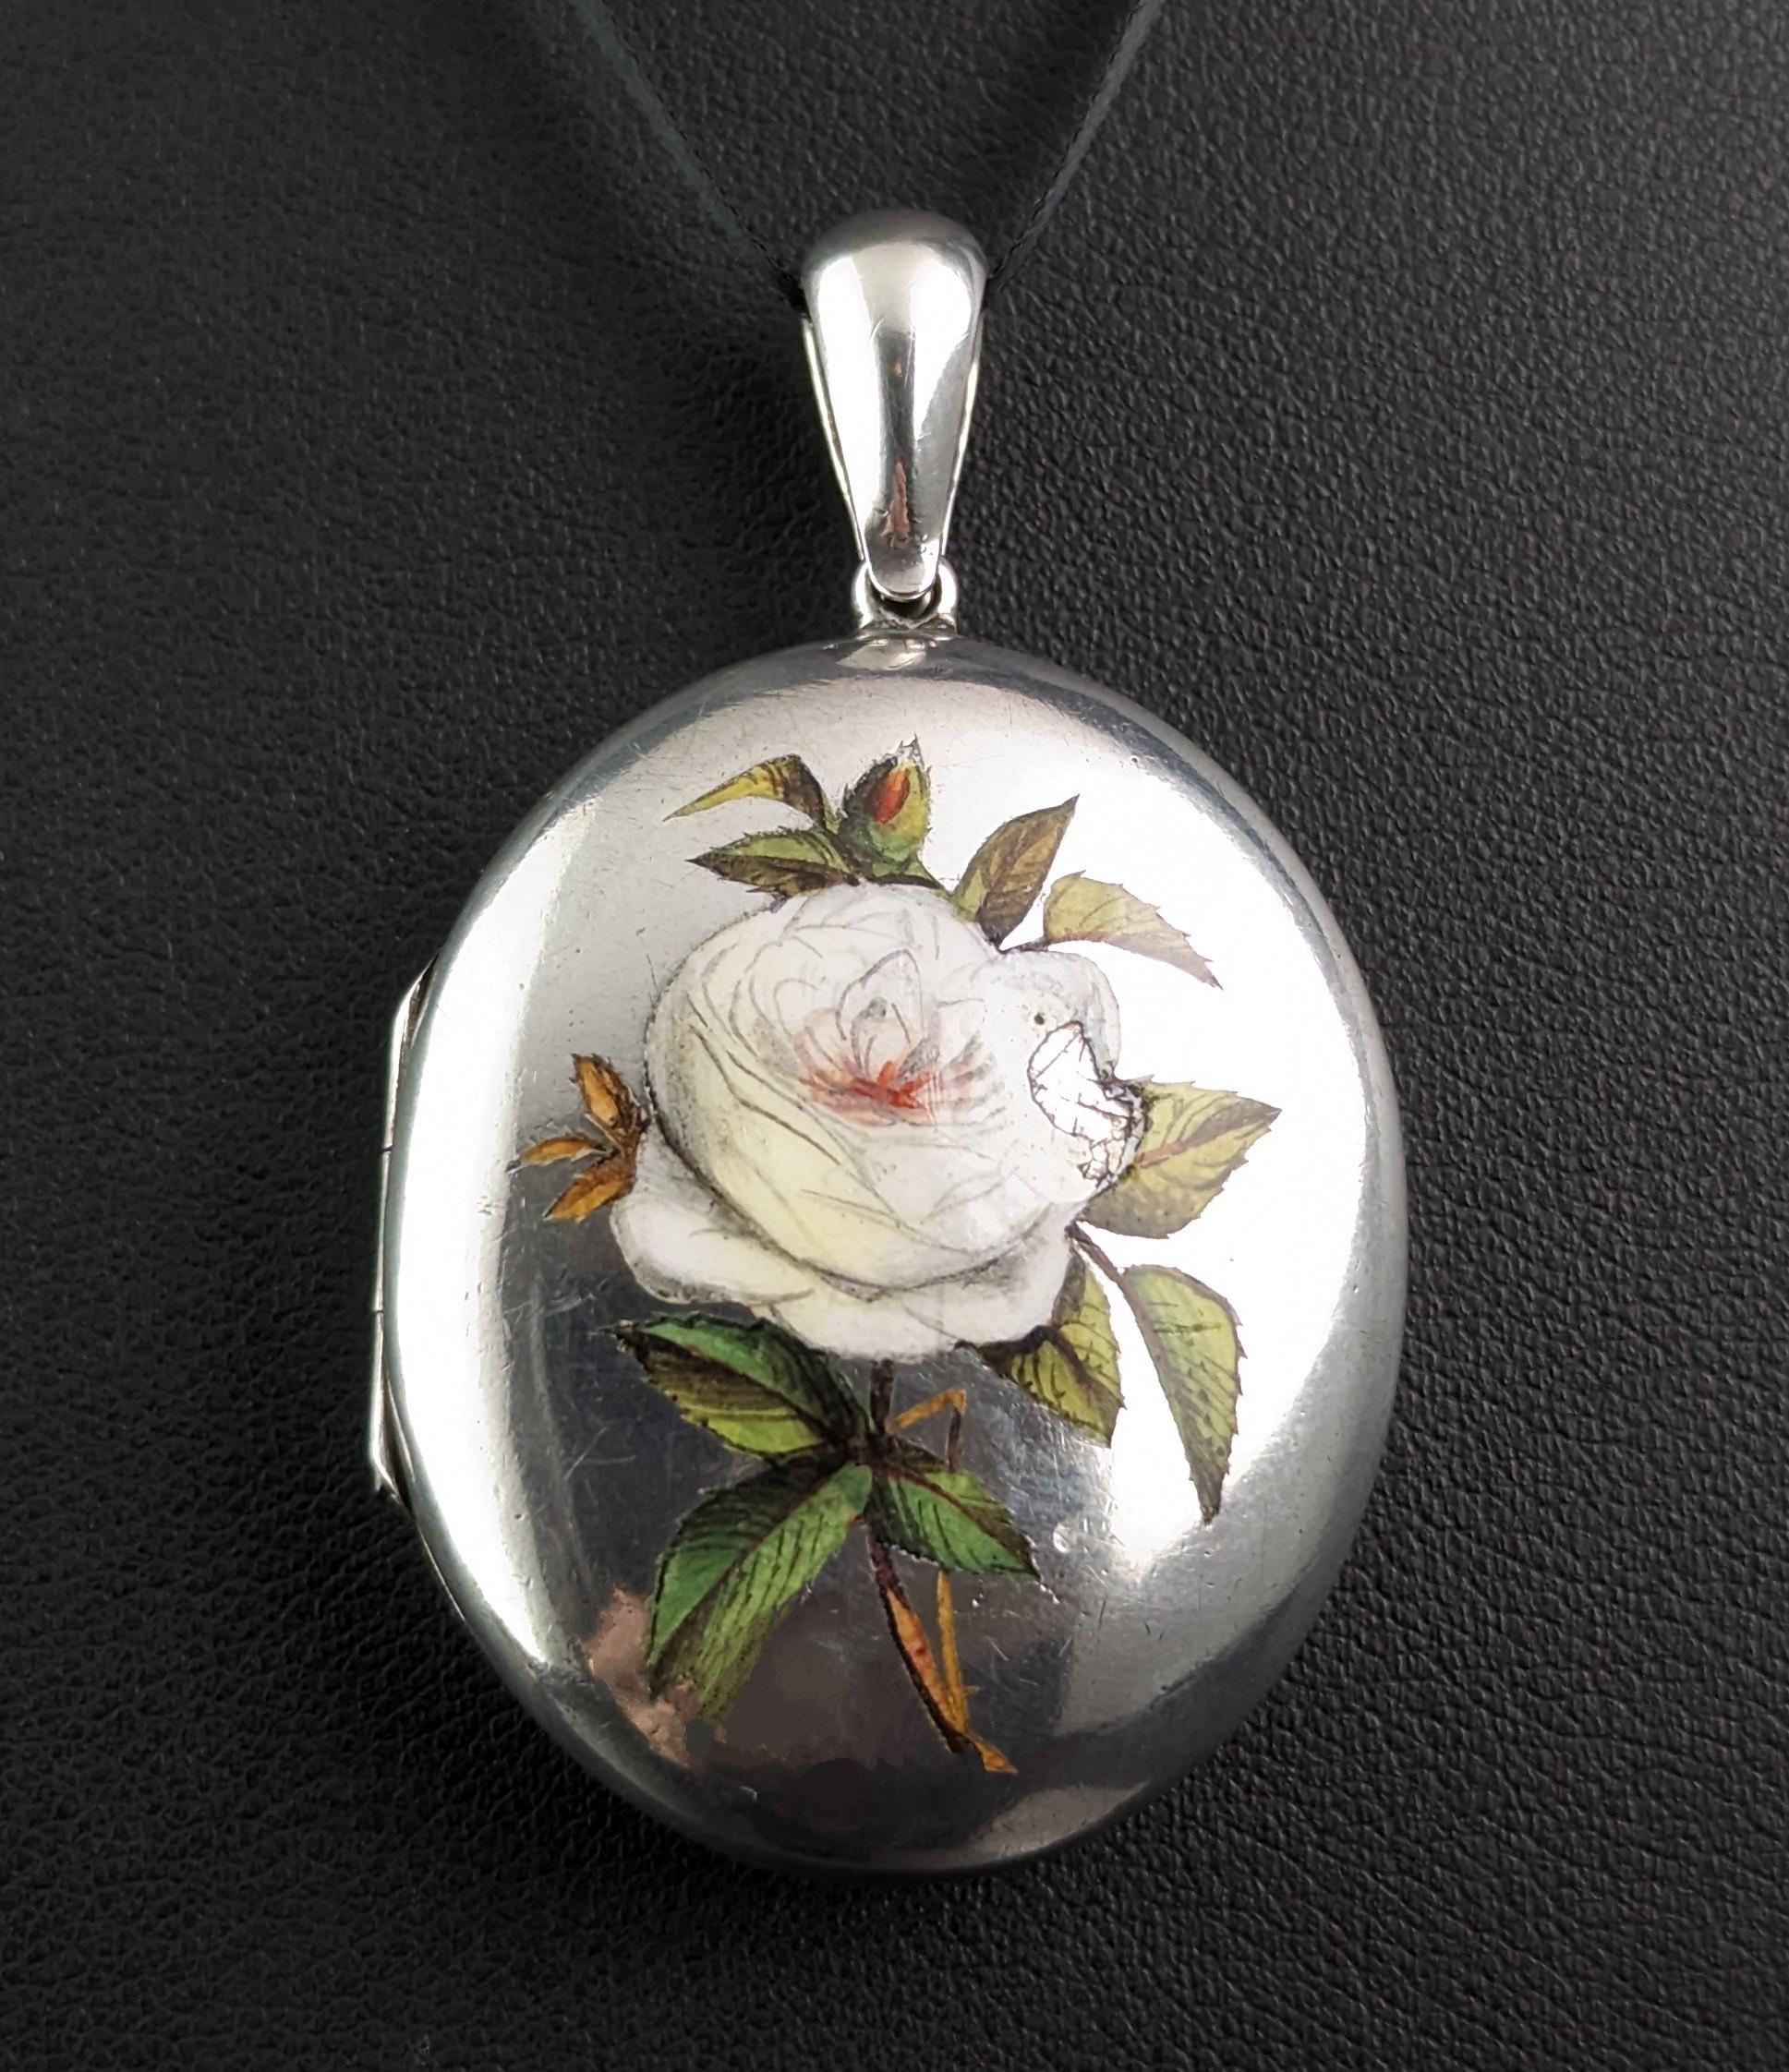 This beautiful antique Victorian sterling silver locket pendant is so pretty and sweet with its attractive enamelled floral design.

It features a meticulously hand painted white rose to the front with leaves and foliate.

It has a large, integral